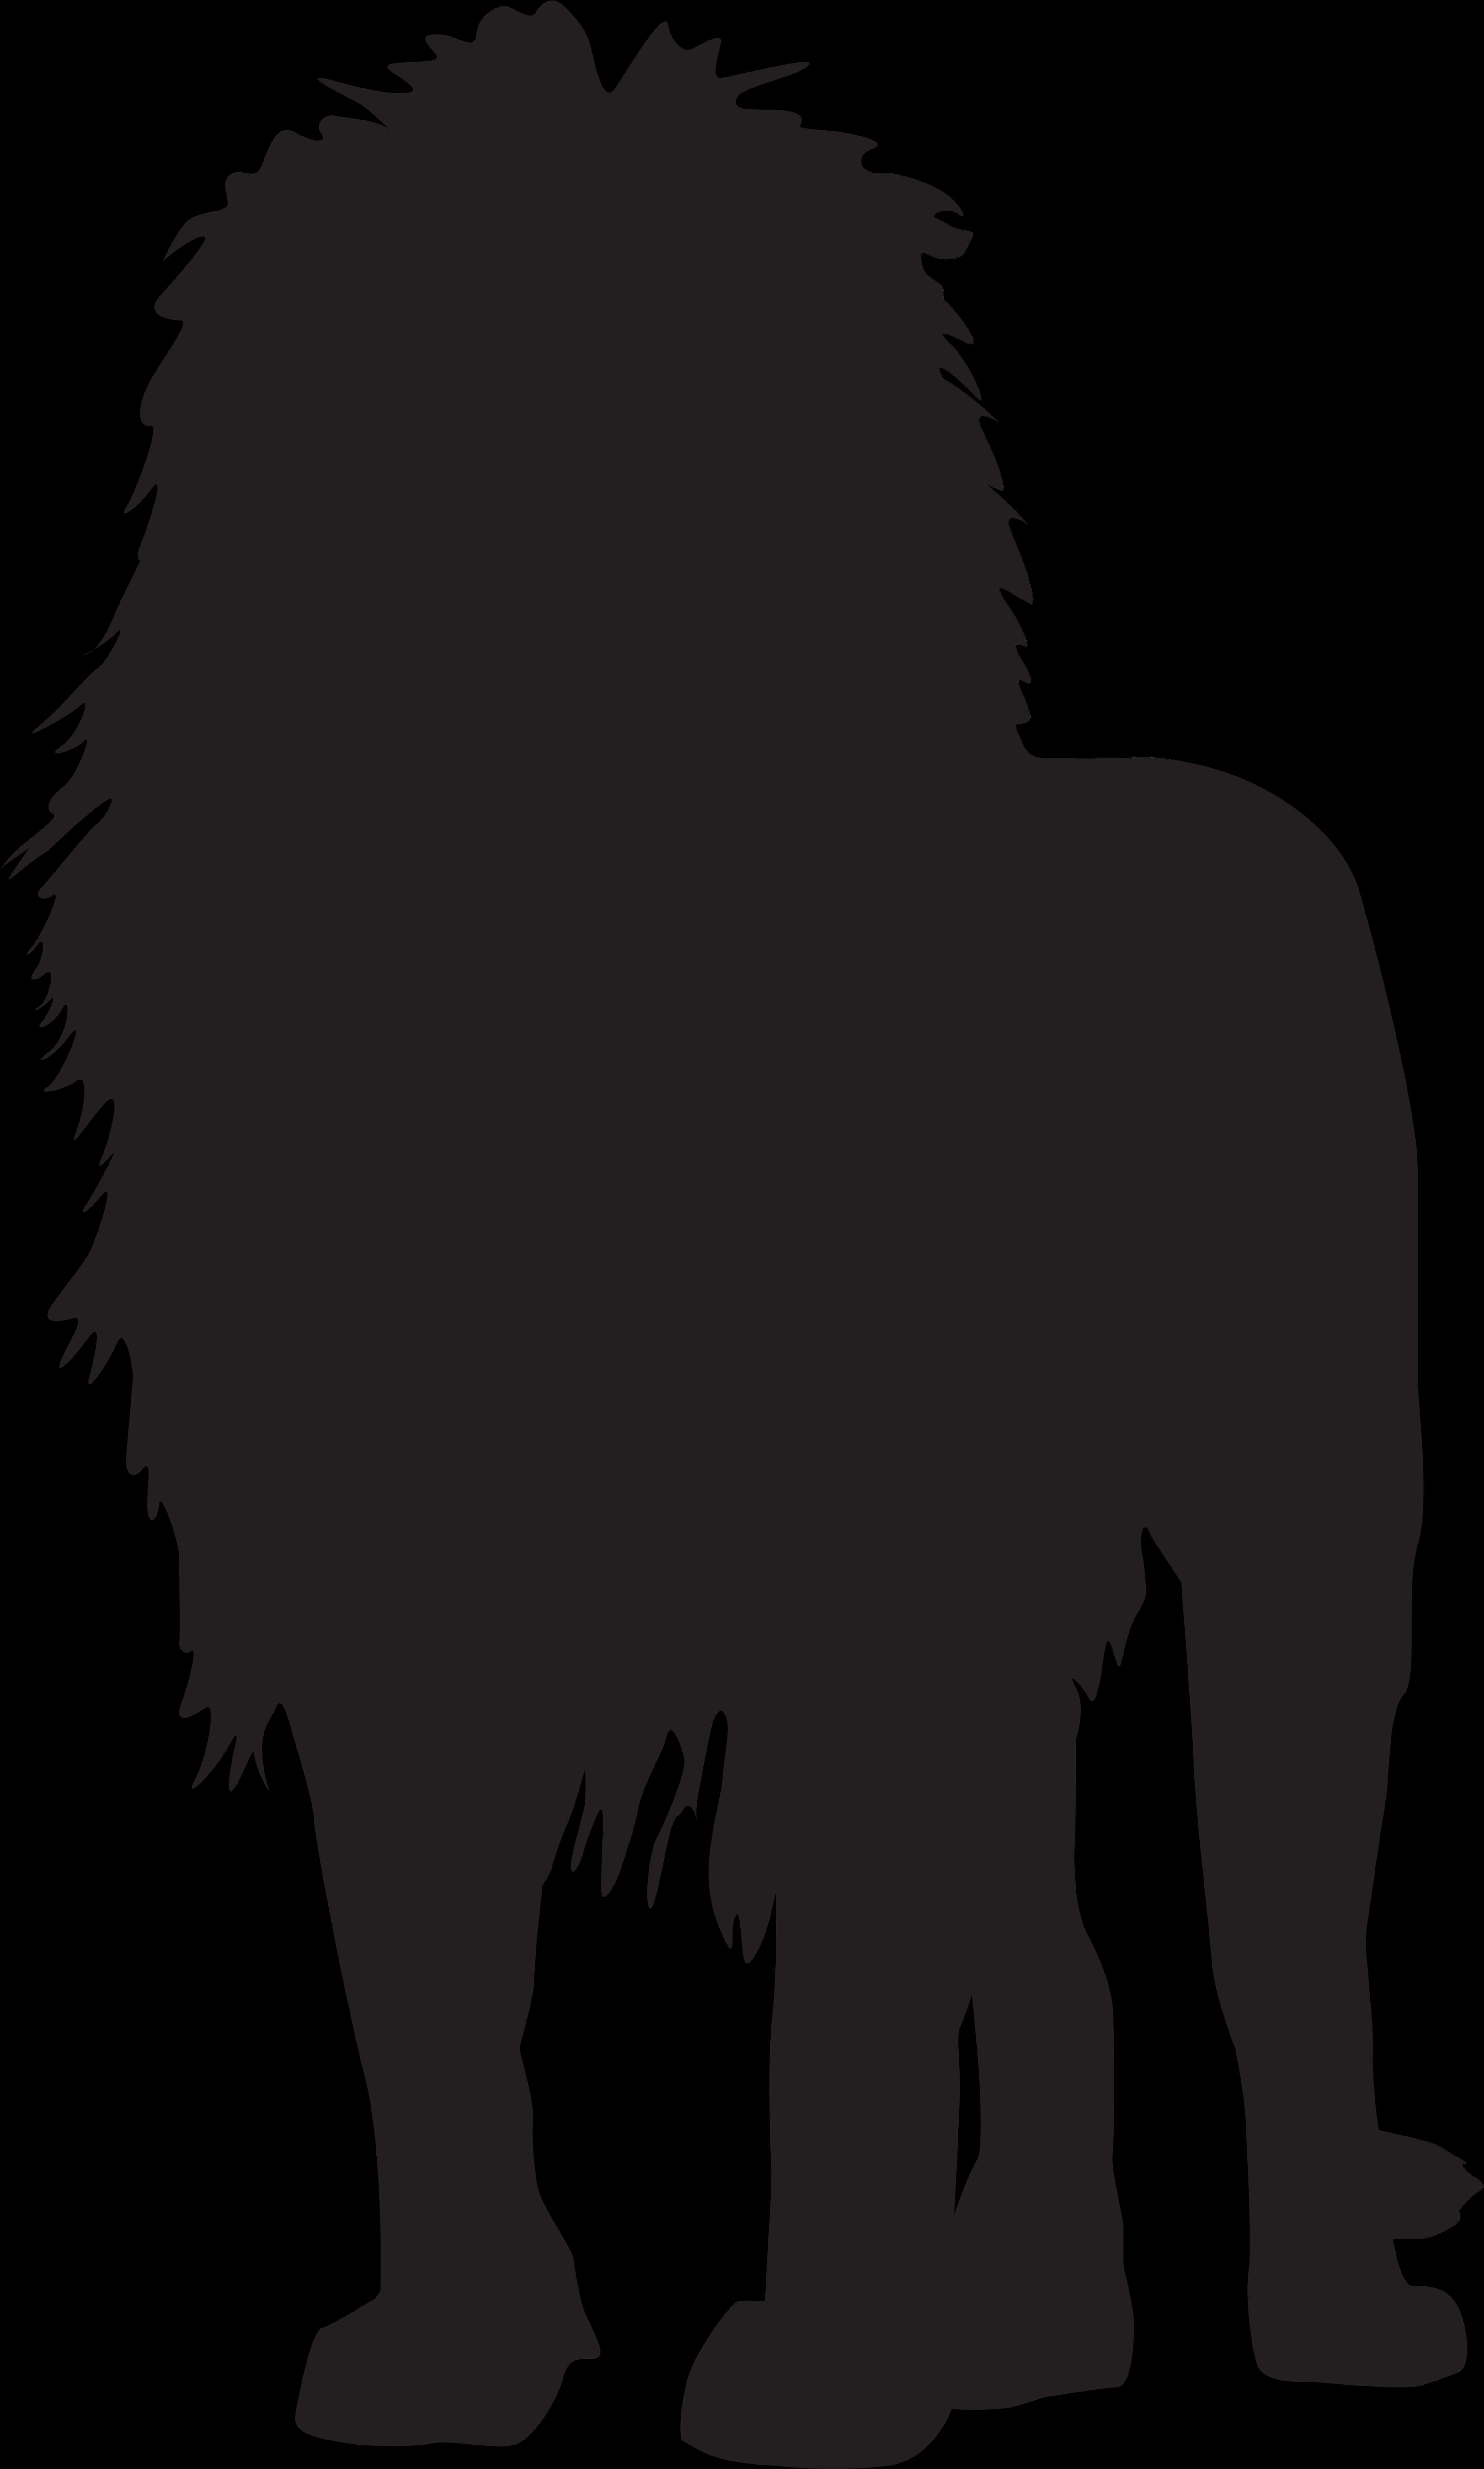 Majestic Lion Silhouette PNG image